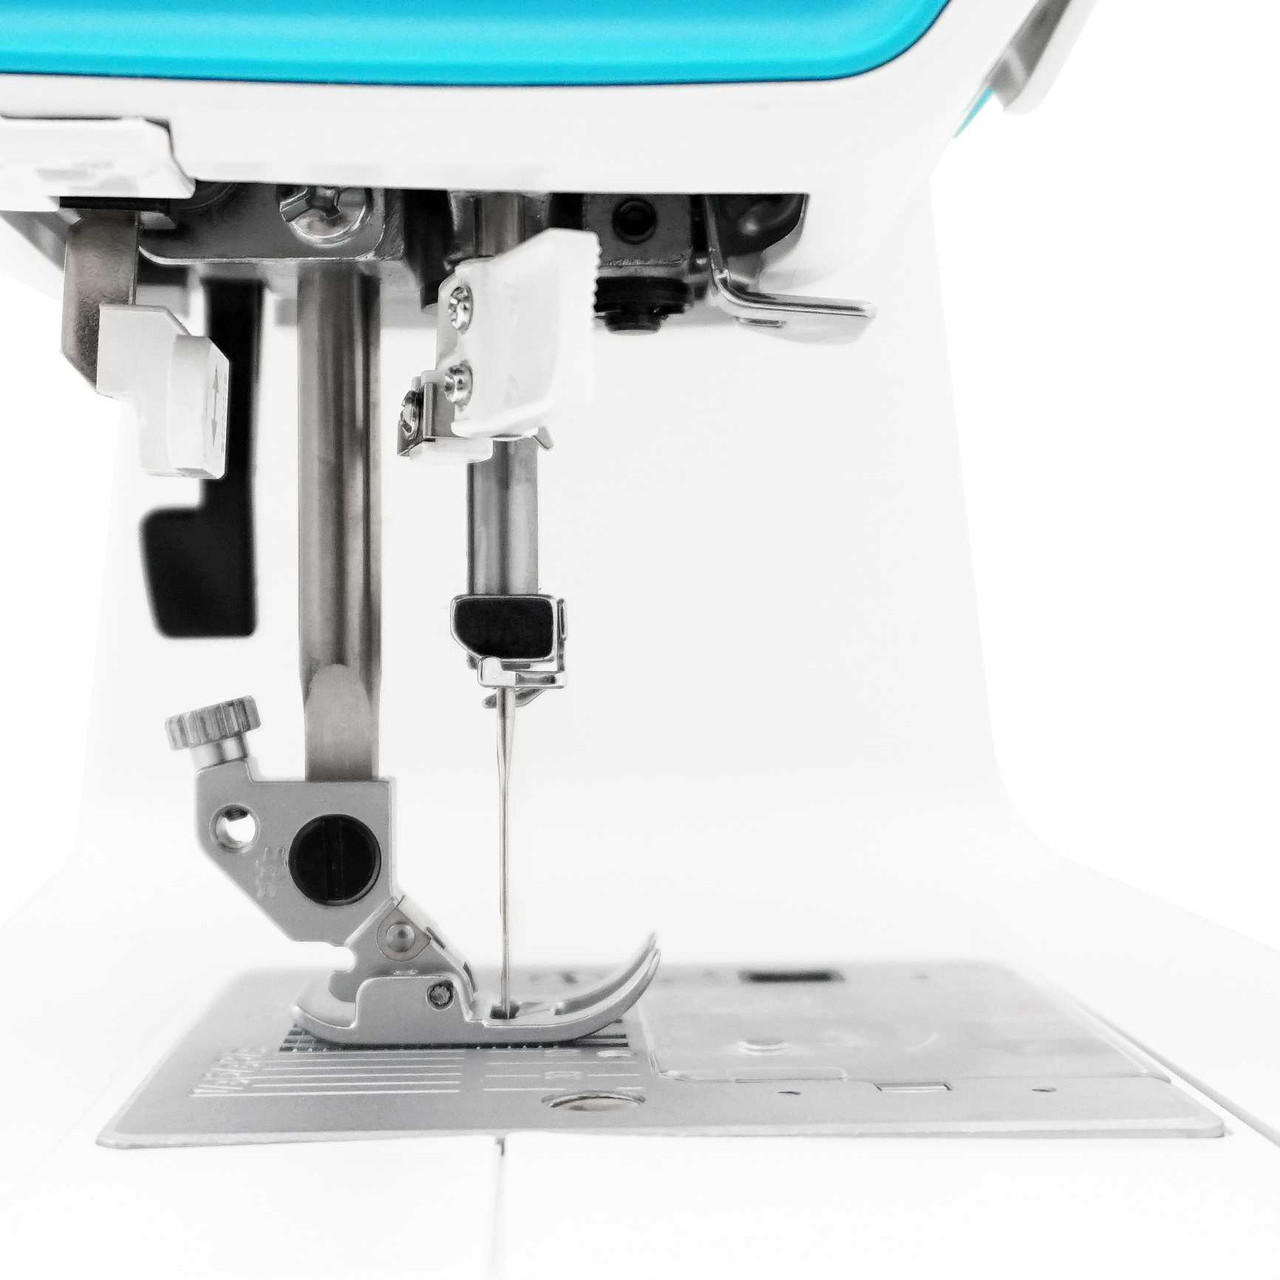 SMARTER BY PFAFF™ 160s Sewing Machine – MH Vacuums